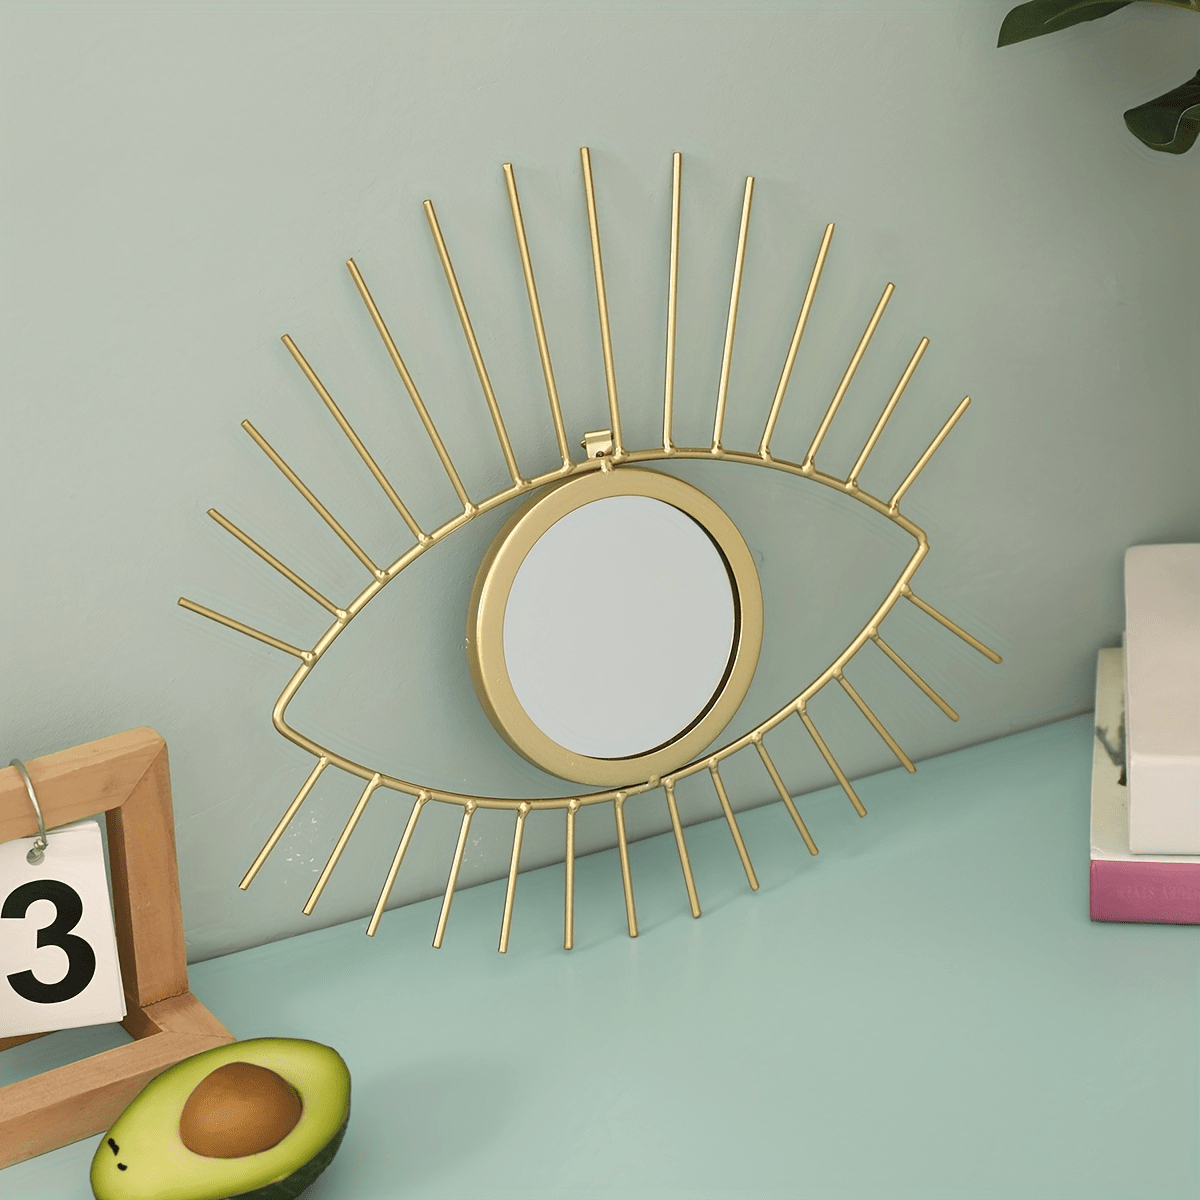 

1pc Metal Outer Frame Wall Mirror, Modern Minimalist Eyes Patterned Self-adhesive Wall Decor, For Living Room, Bedroom, Bathroom And Office Porch Decor, Home Decoration